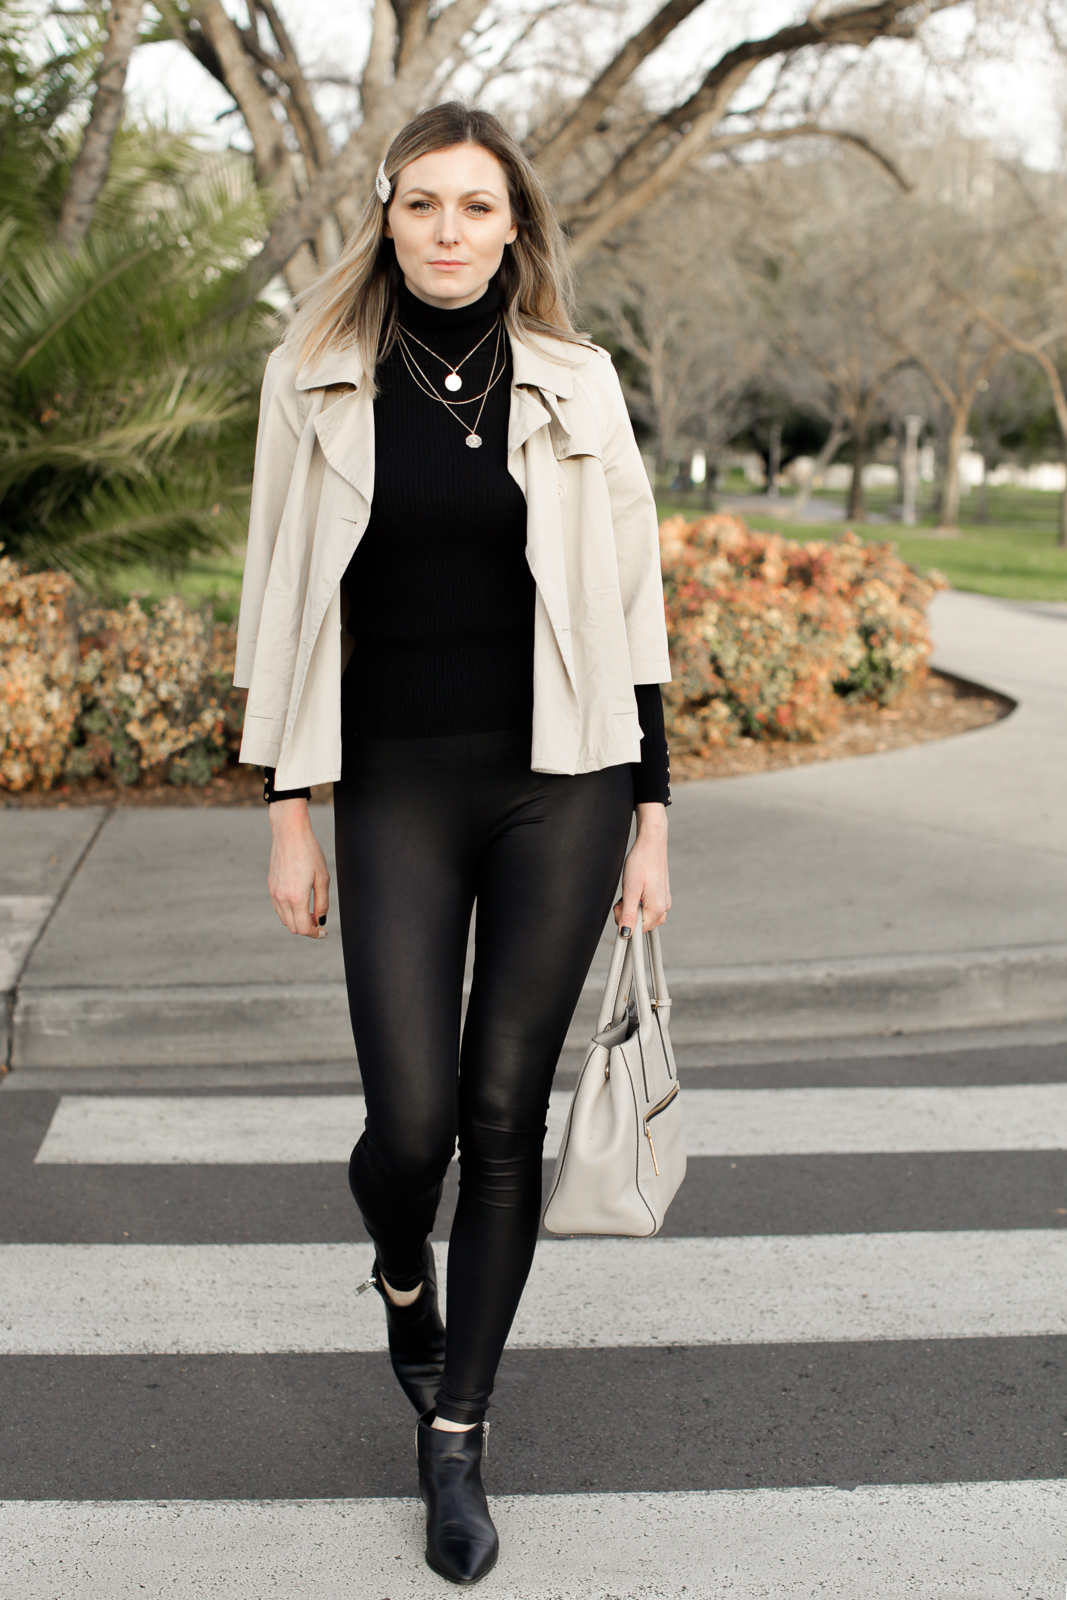 3 Ways to Style the Spanx Faux Leather Leggings